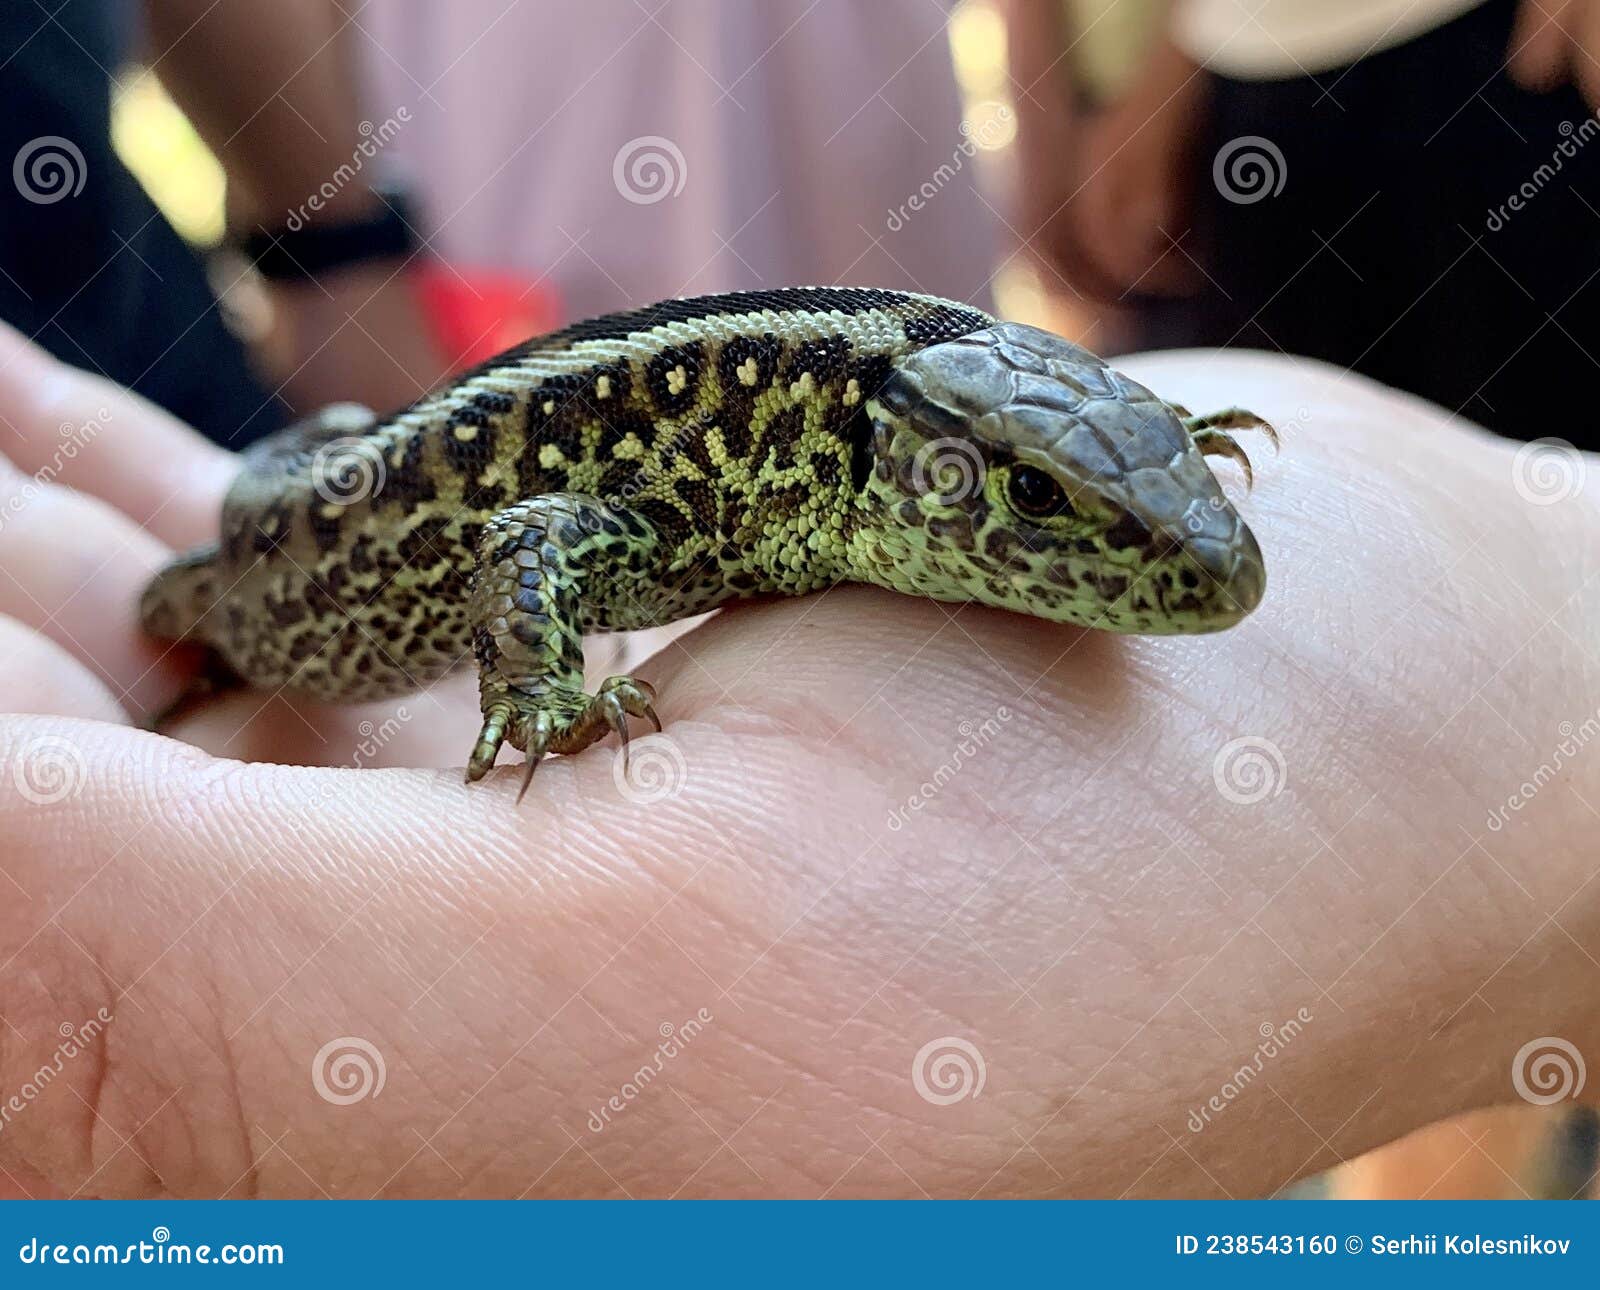 The Guy is Holding a Lizard in His Hand. Lizard in the Hands of a Man,  Close-up. a Beautiful Reptile Held Captive by Humans Stock Photo - Image of  reptilian, holding: 238543160